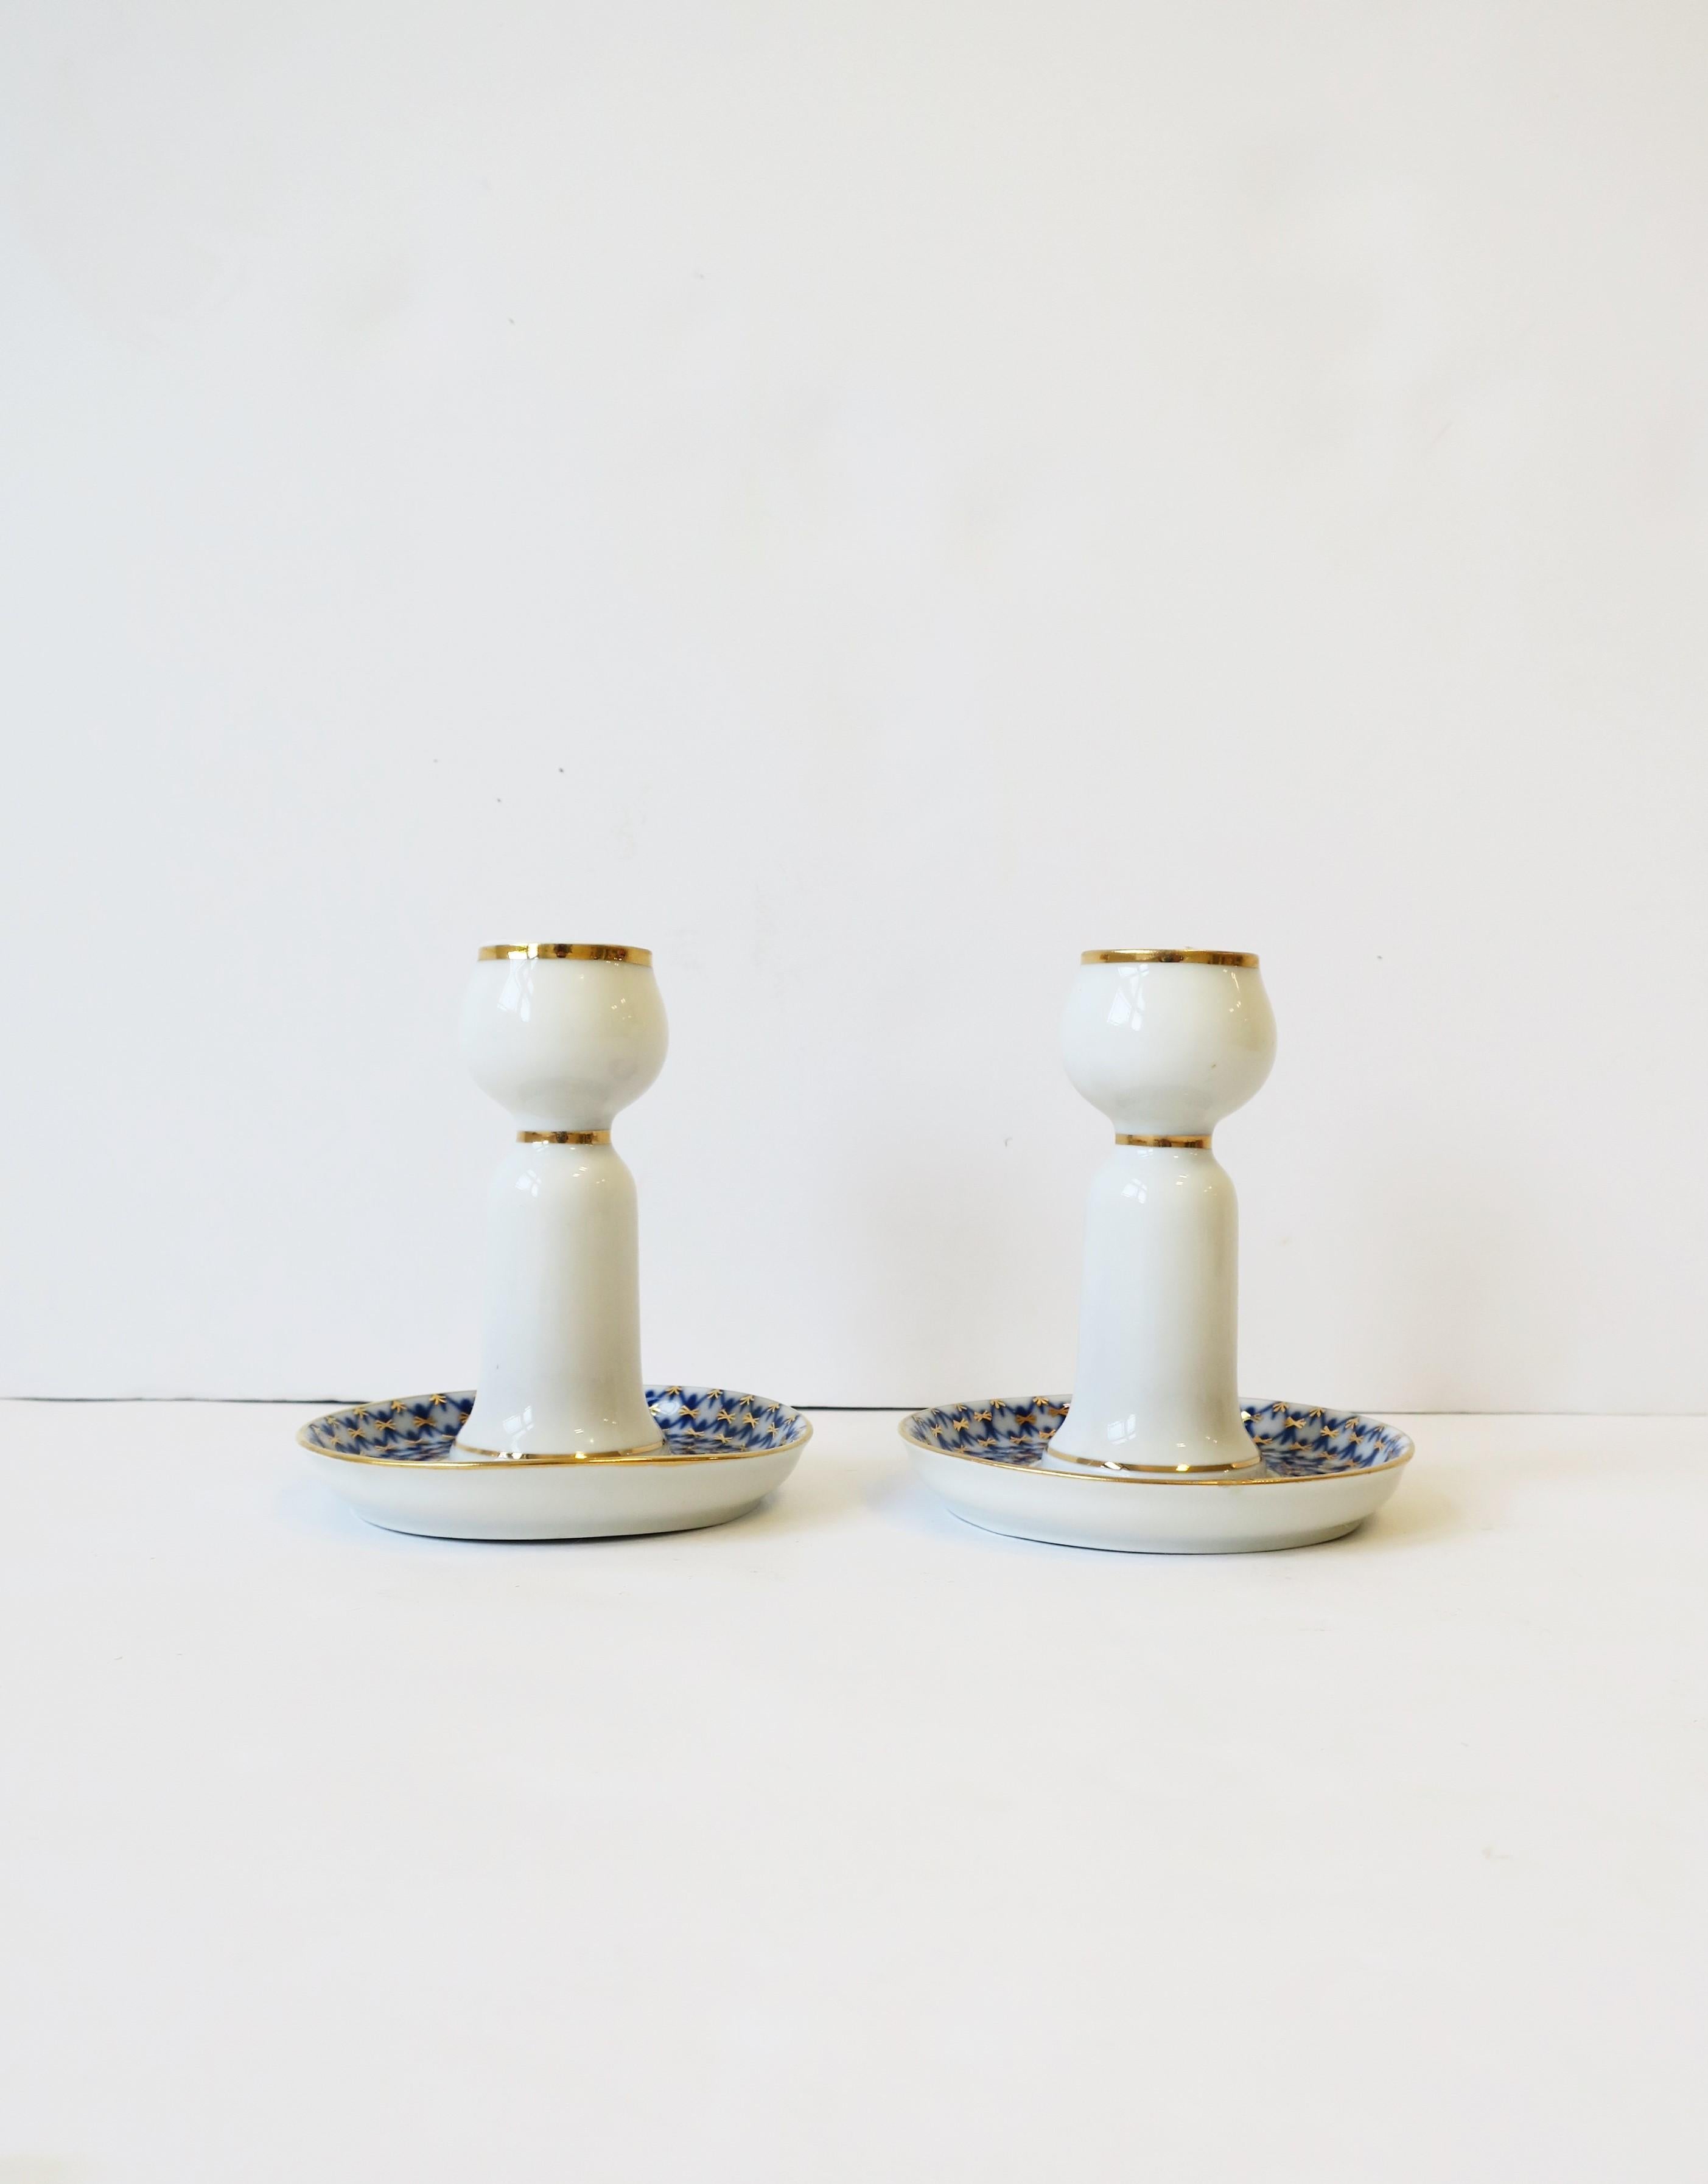 Russian Lomonosov Blue Gold White Porcelain Candlesticks Holders, Pair In Good Condition For Sale In New York, NY